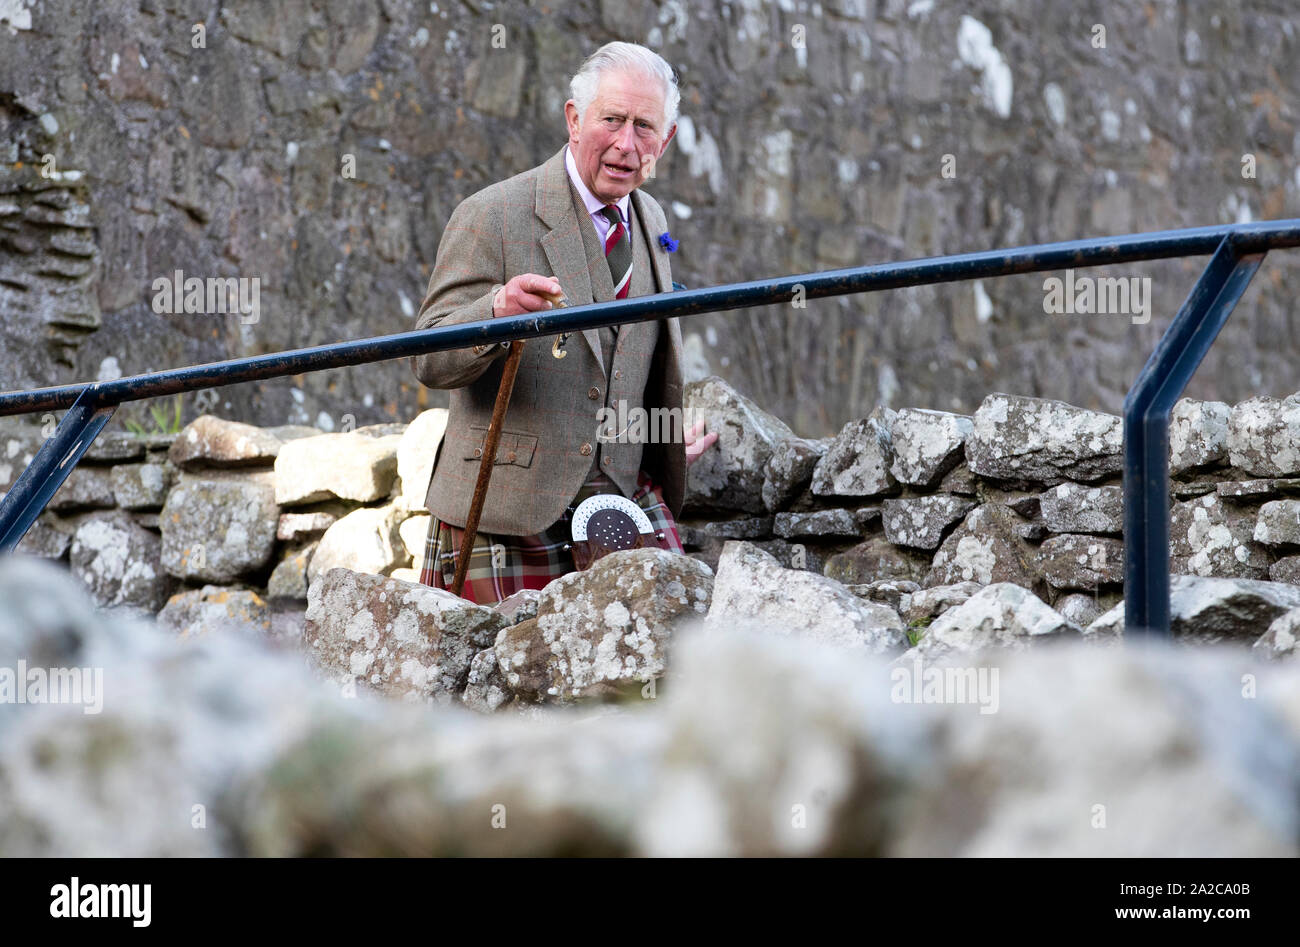 The Prince of Wales, known as the Duke of Rothesay while in Scotland, during a visit to Dunnottar Castle during a visit to Dunnottar Castle, the cliff top fortress which was once the home of the Earls Marischal, near Stonehaven. Stock Photo